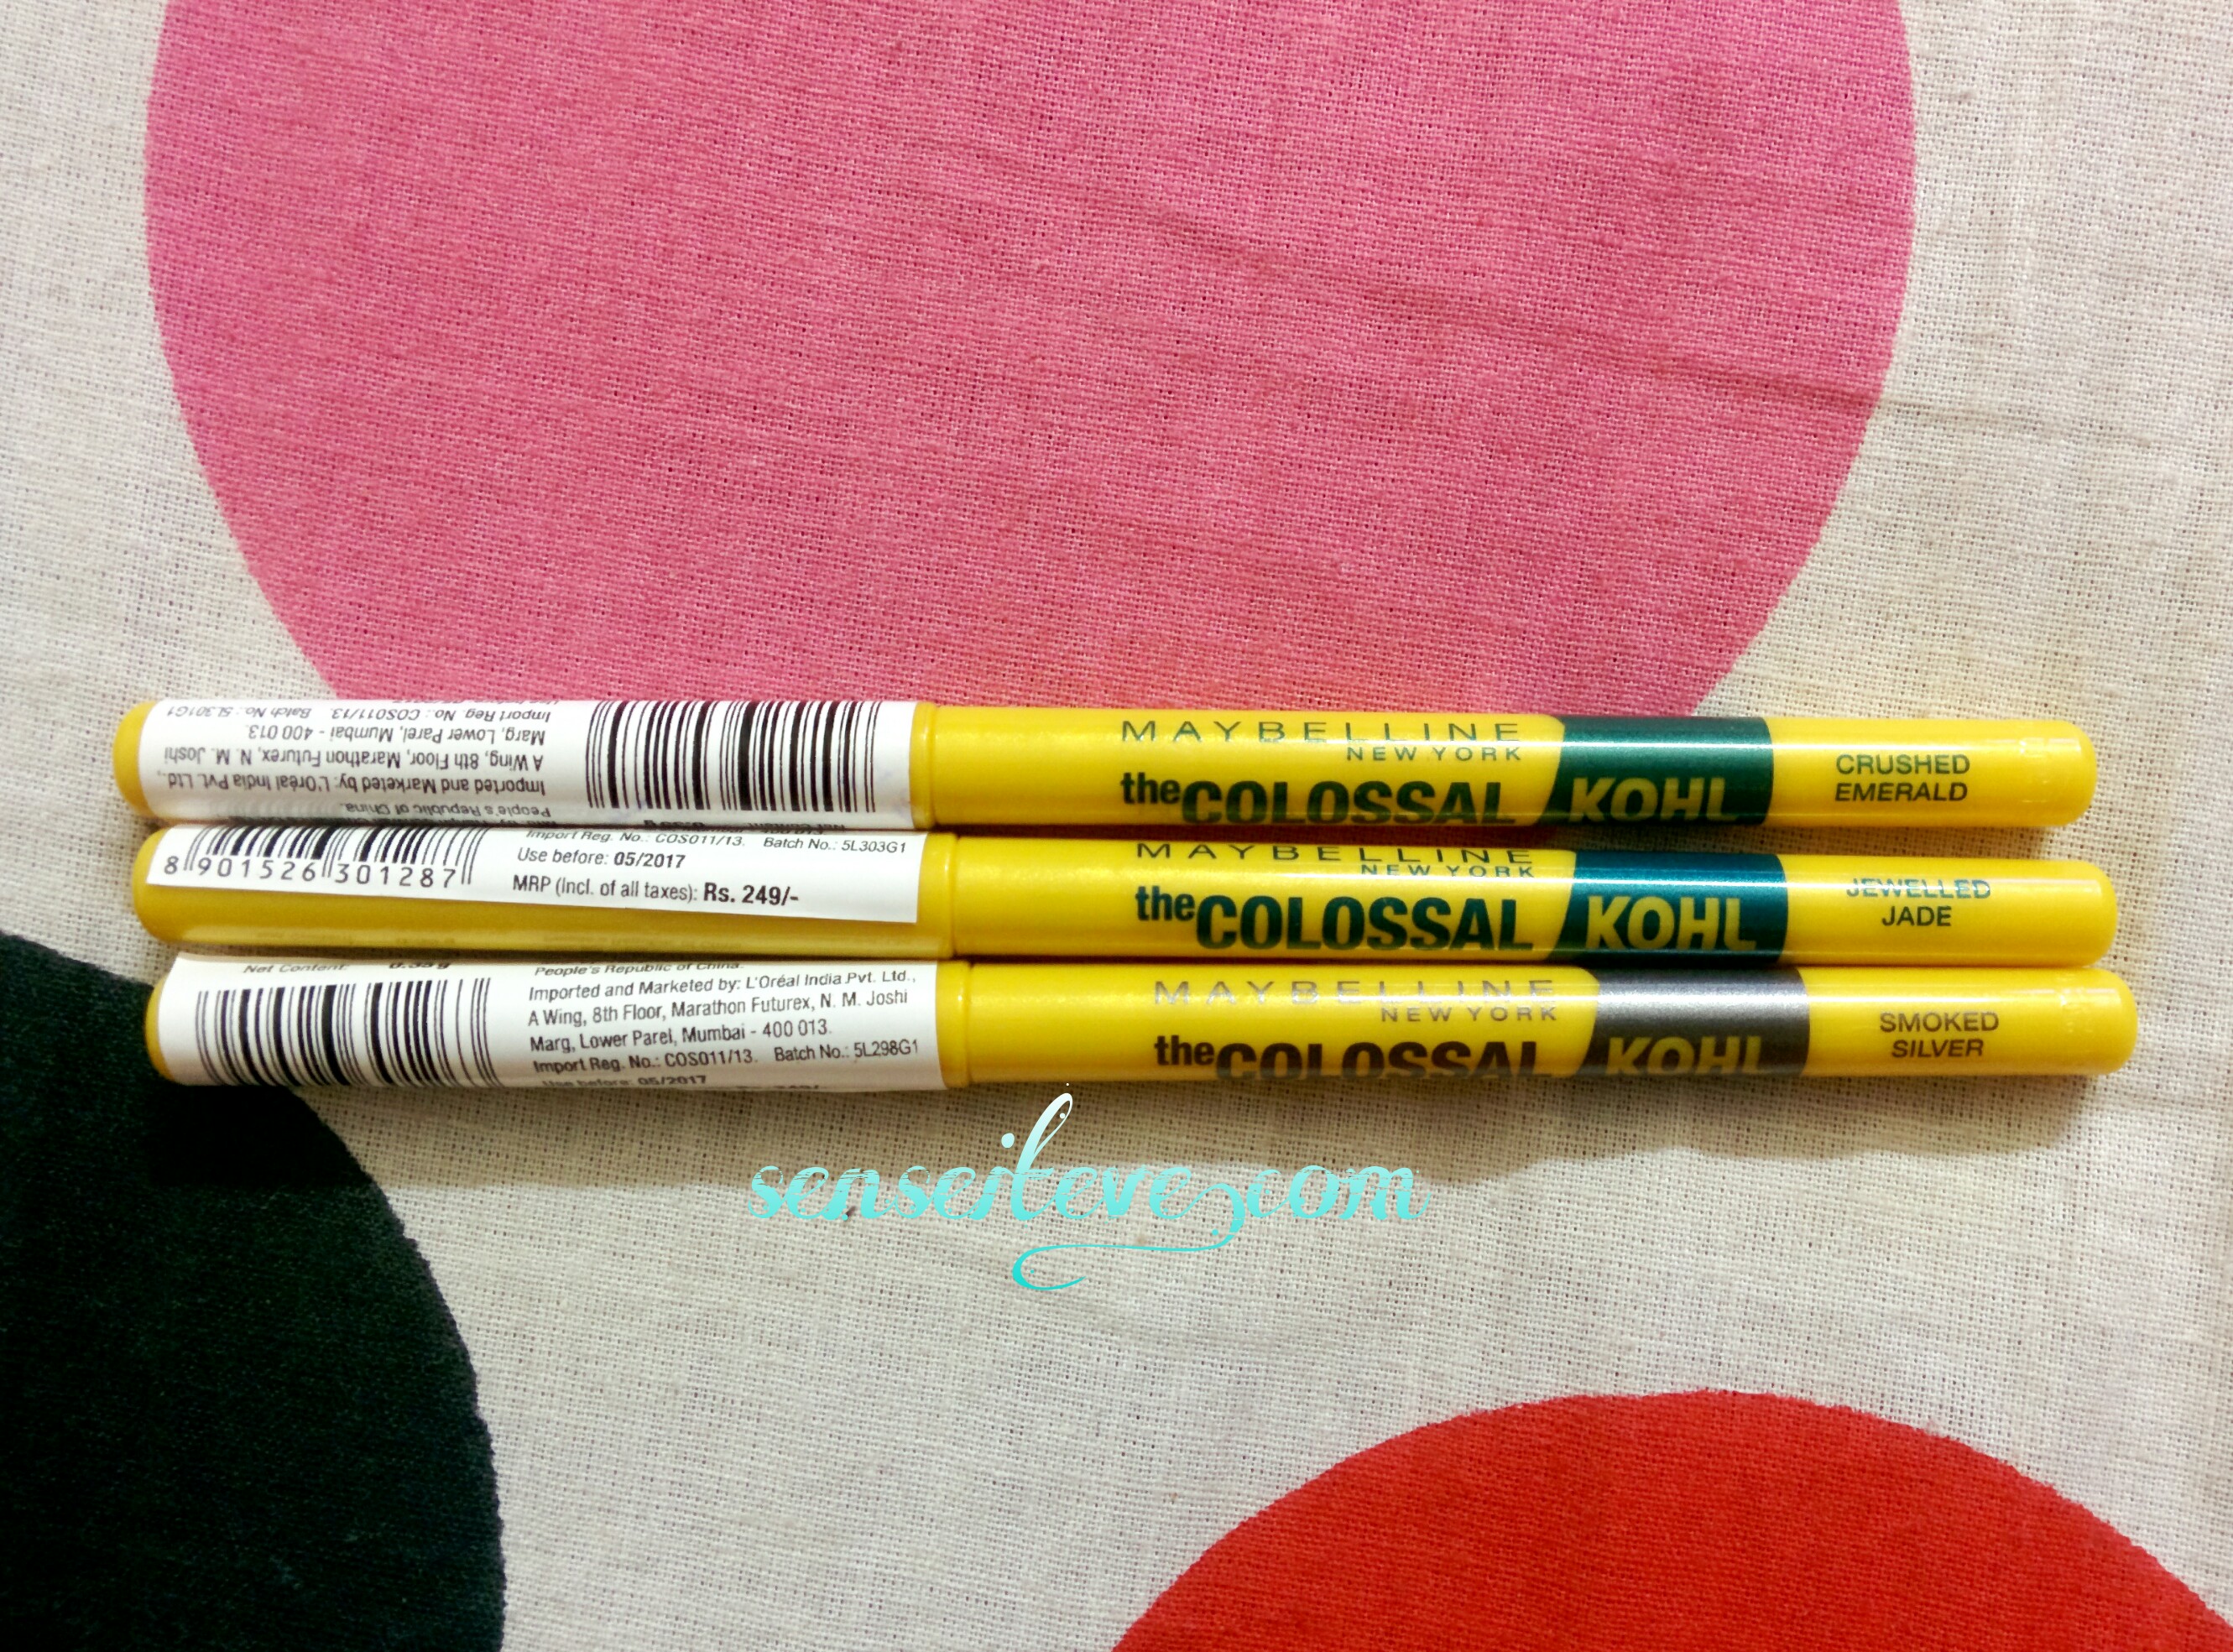 Maybelline-the-Colossal-Kohl-Review